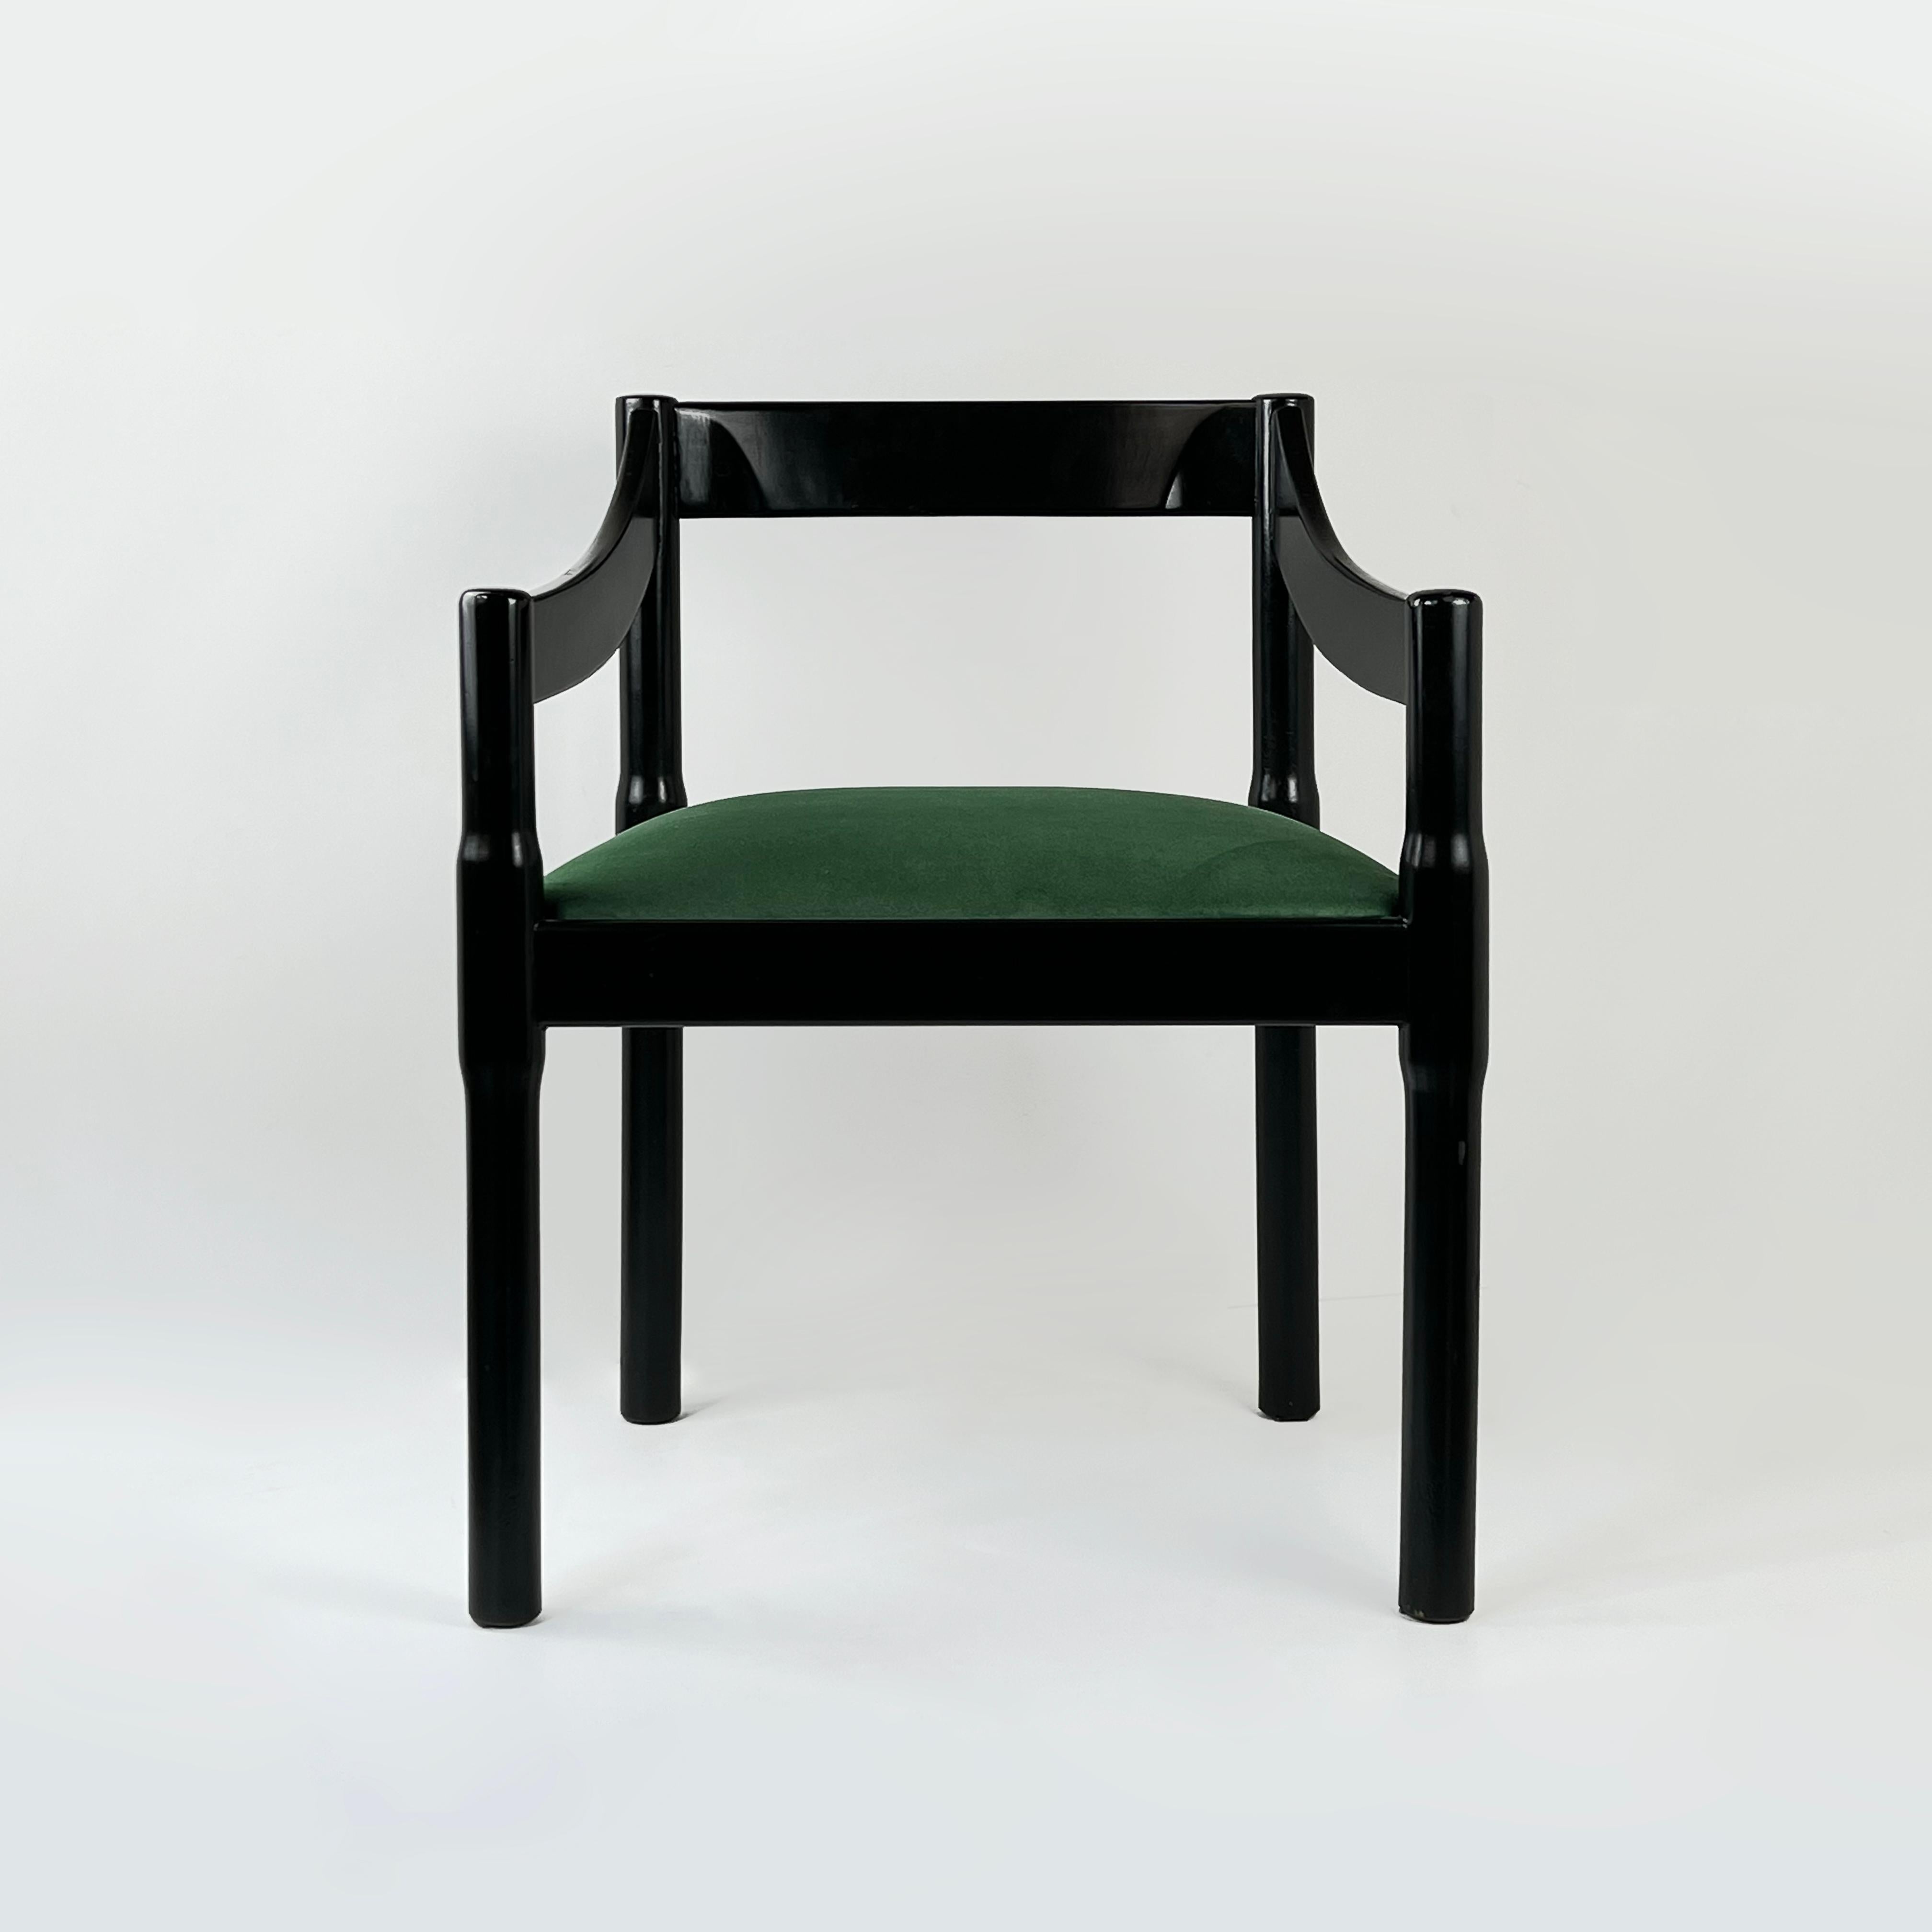 20th Century 1st Edition Carimate Armchair Designed by Vico Magistretti for Comi (Artemide) For Sale